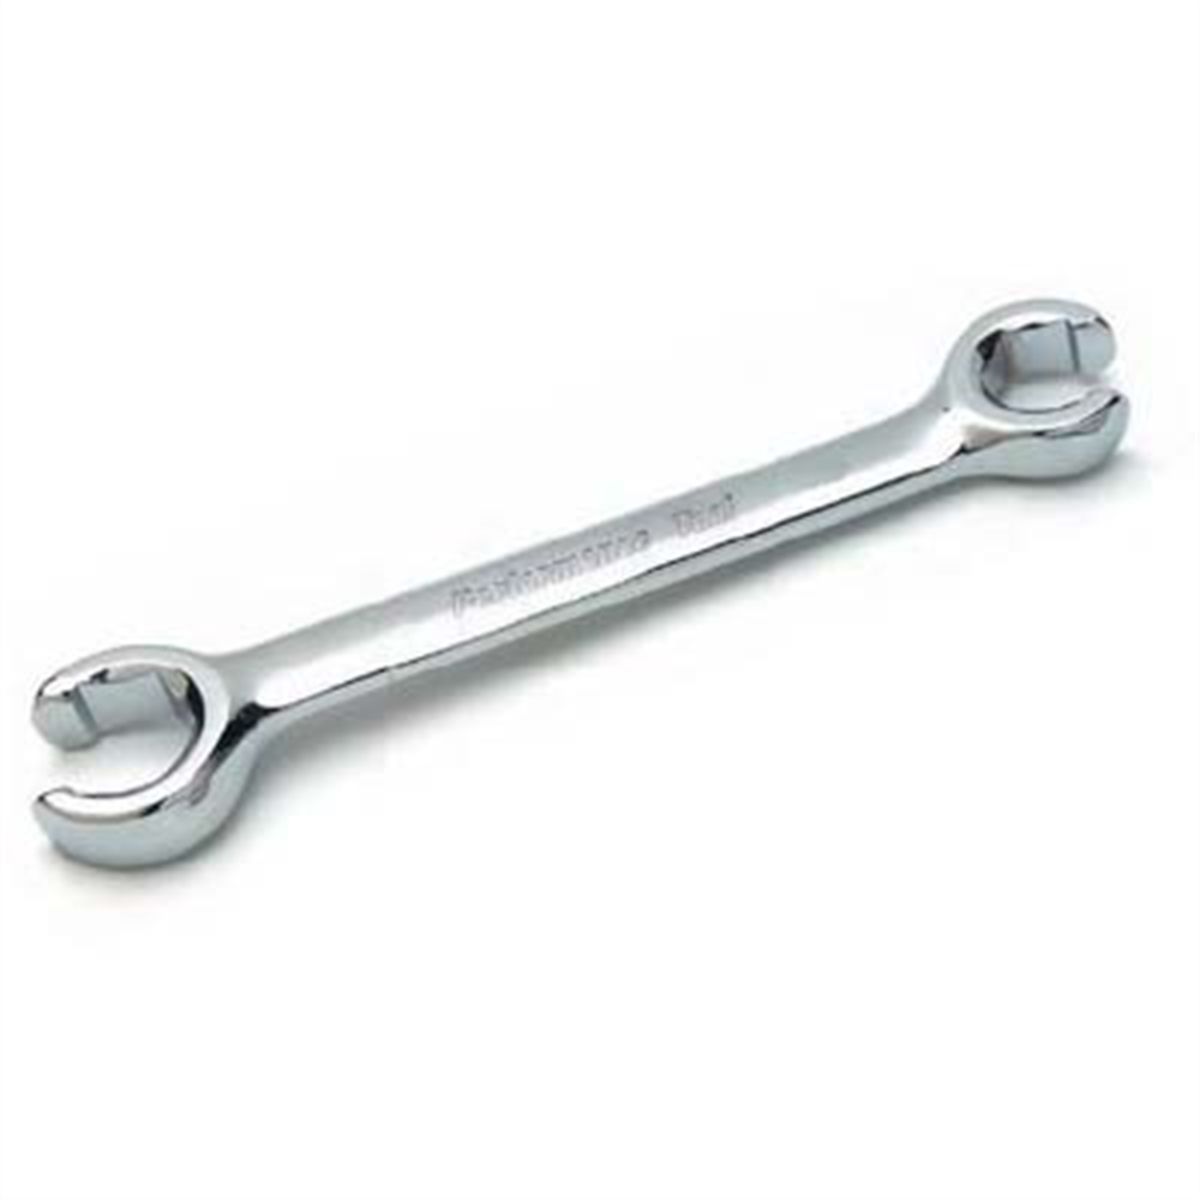 16mm x 18mm Flare Nut Wrench